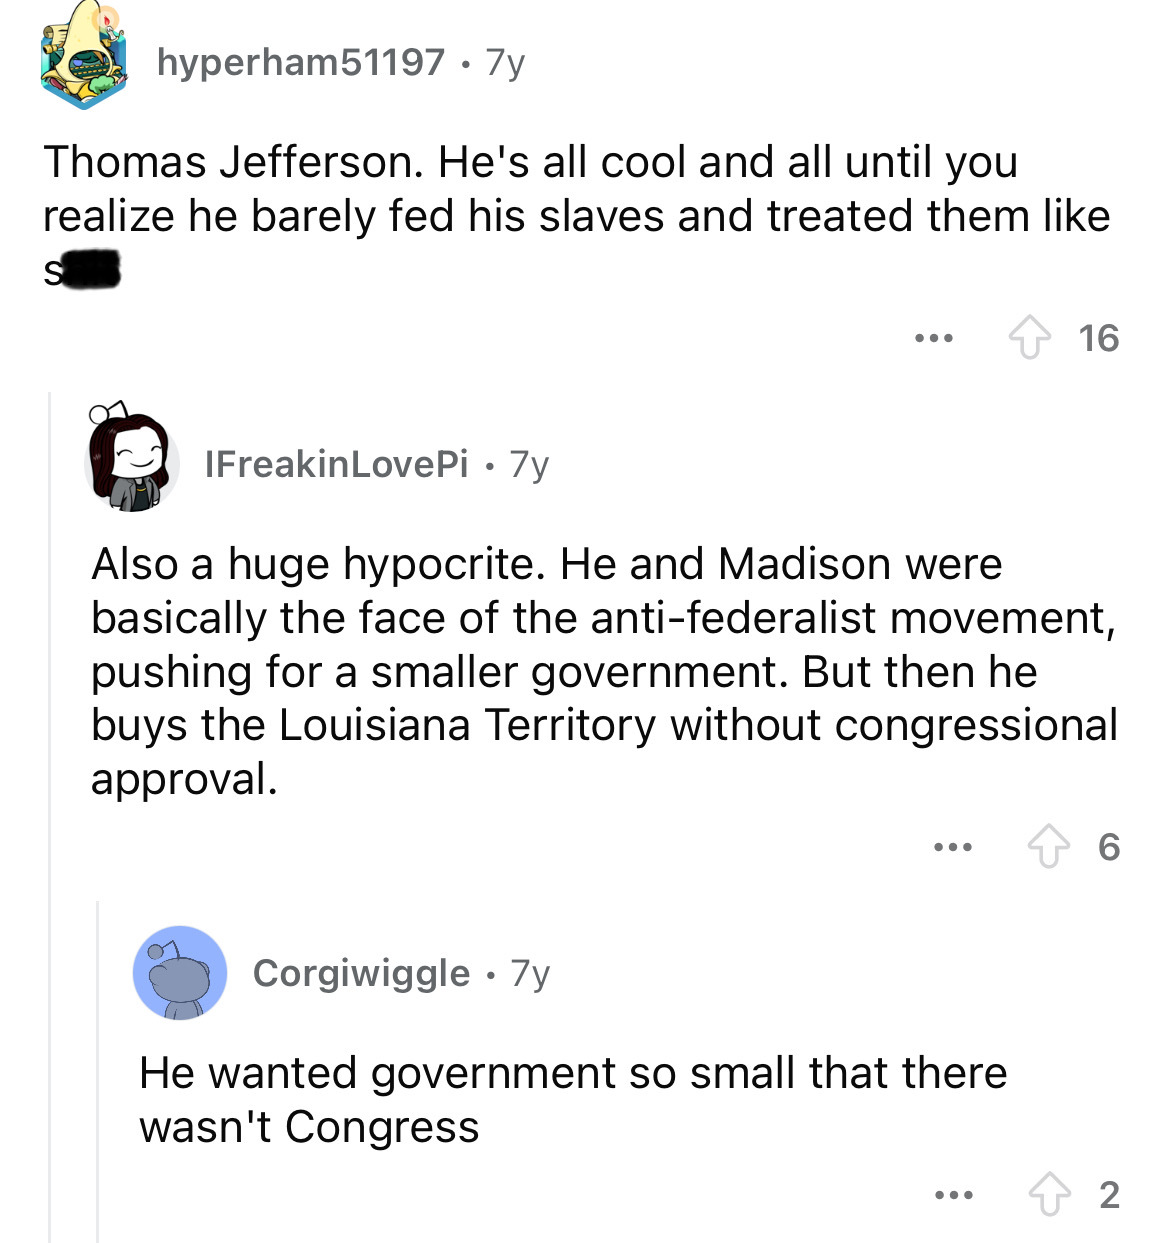 screenshot - hyperham51197 7y Thomas Jefferson. He's all cool and all until you realize he barely fed his slaves and treated them S ... 16 IFreakinLovePi 7y Also a huge hypocrite. He and Madison were basically the face of the antifederalist movement, push